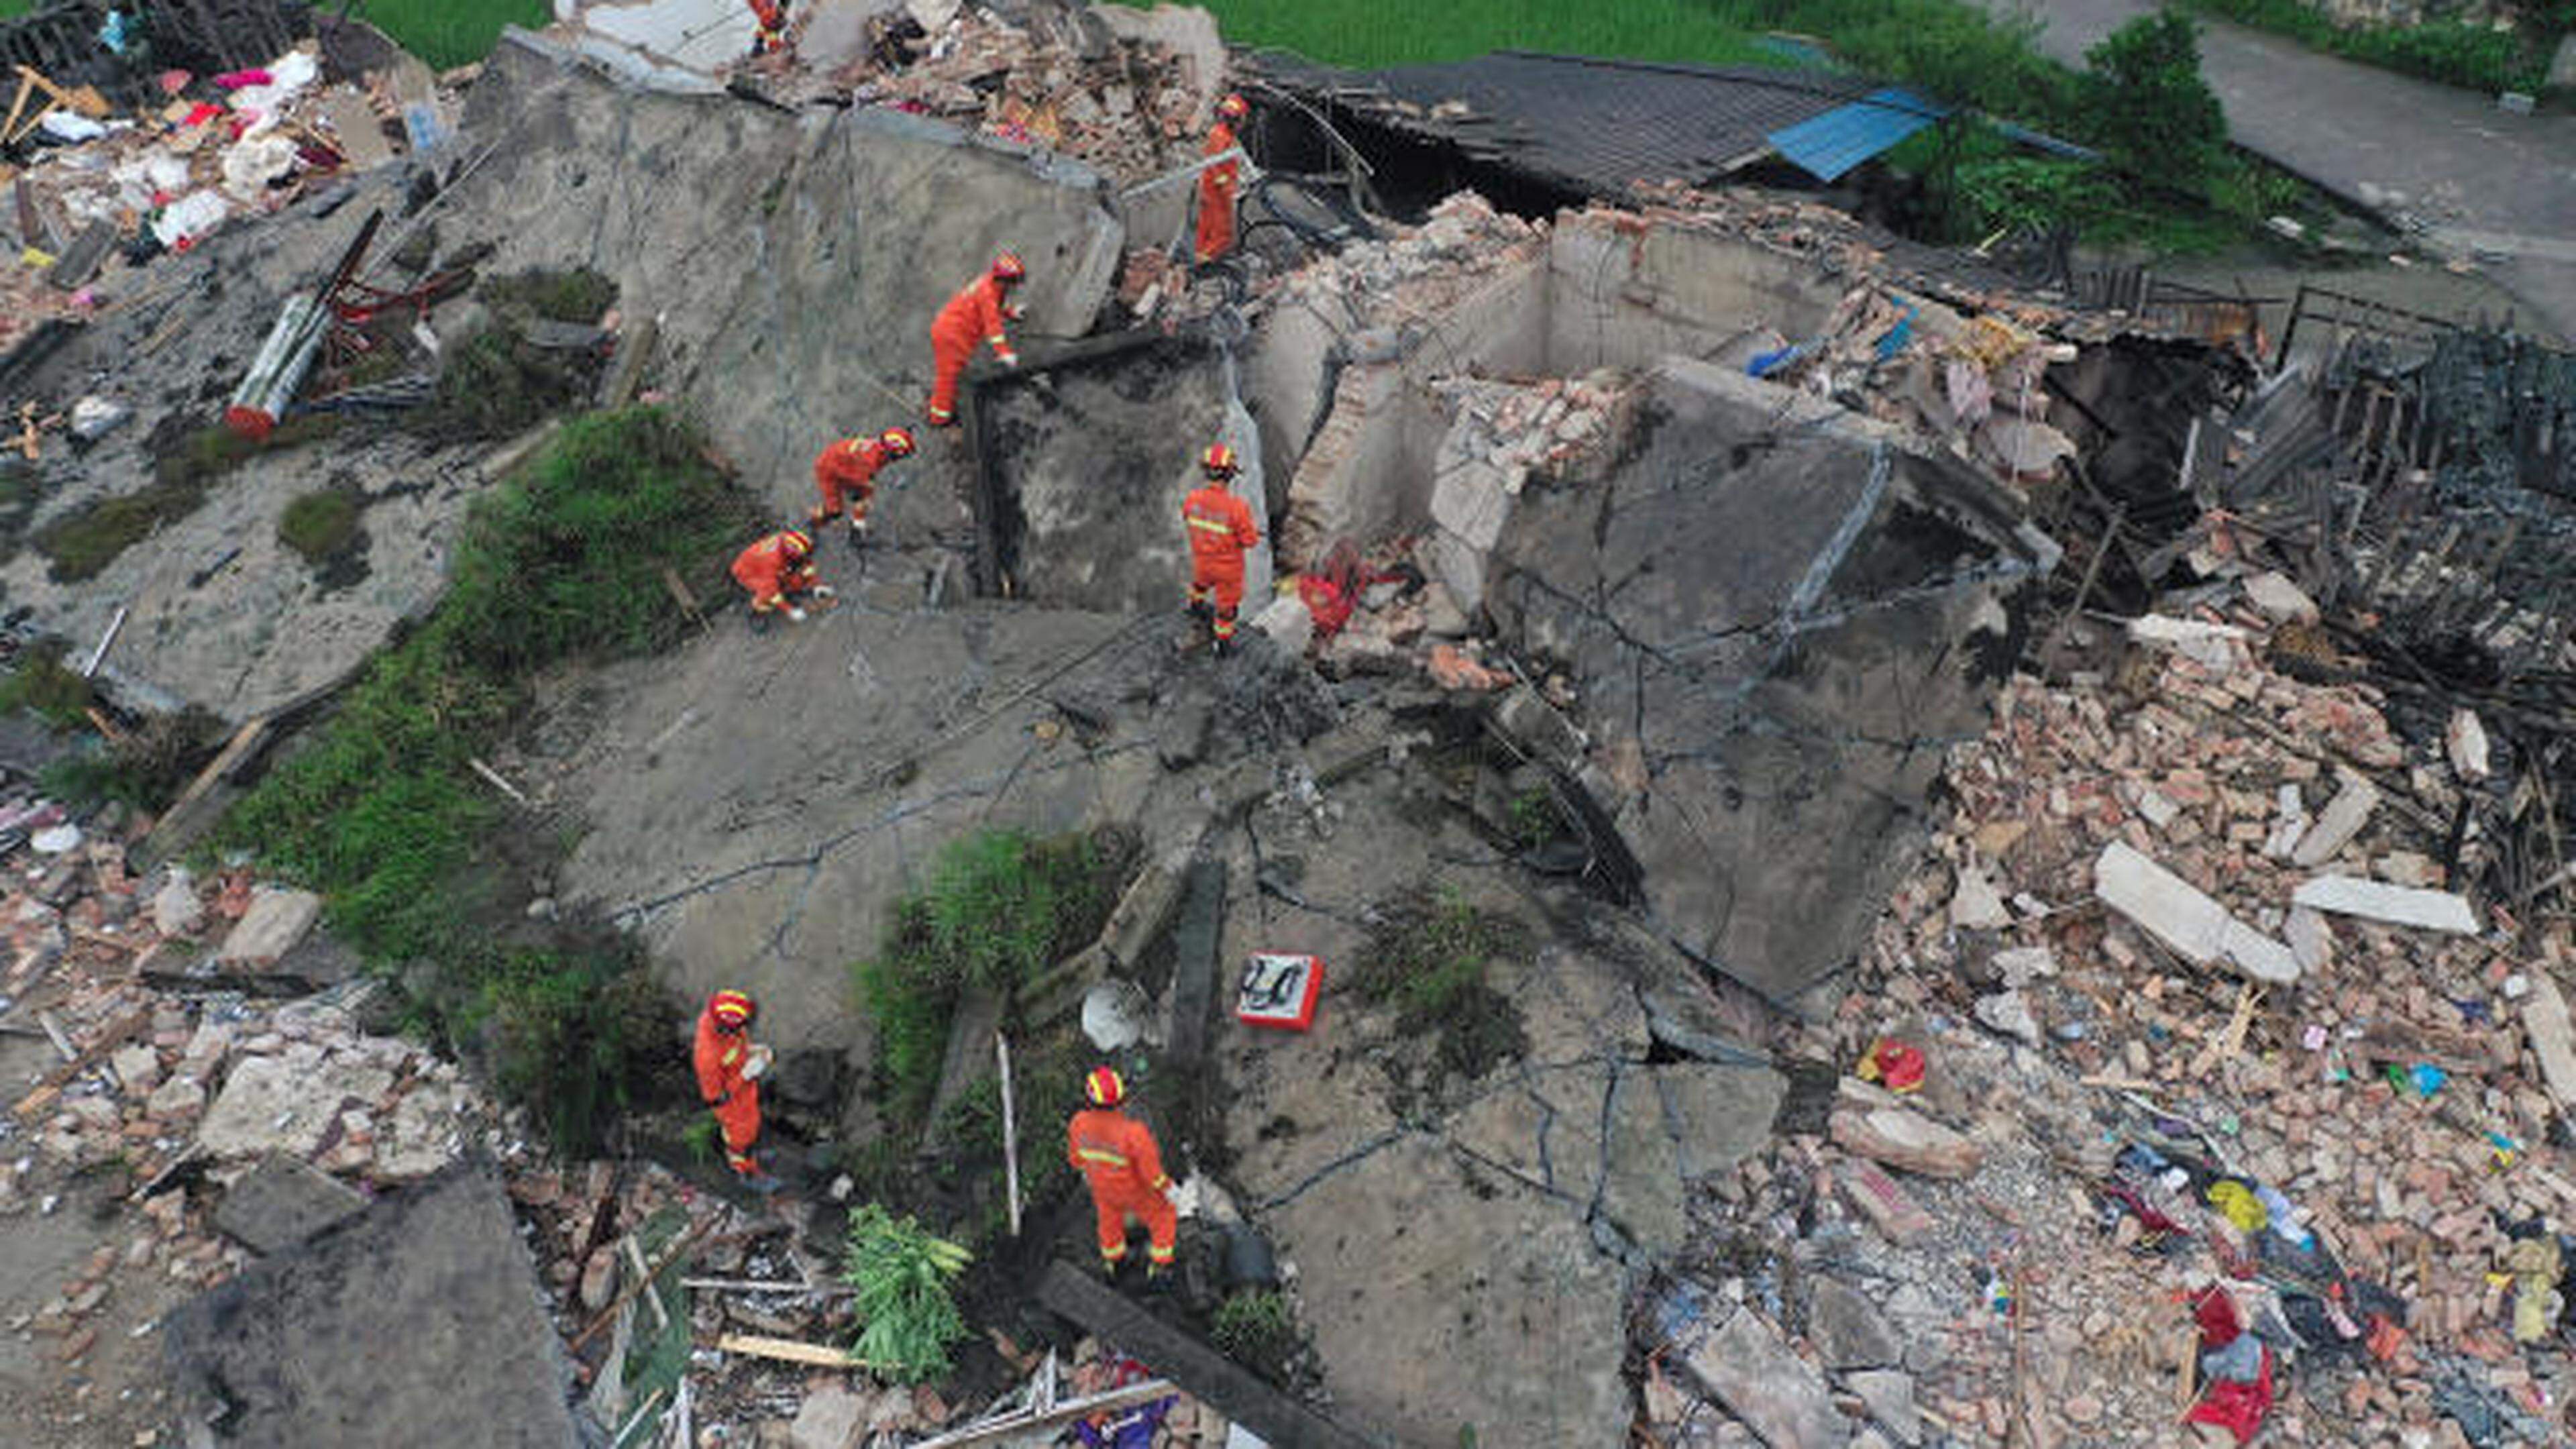 Rescue workers are seen on a collapsed house after earthquakes hit Changning county in Yibin, Sichuan province, China June 18, 2019. REUTERS/Stringer ATTENTION EDITORS - THIS IMAGE WAS PROVIDED BY A THIRD PARTY. CHINA OUT.